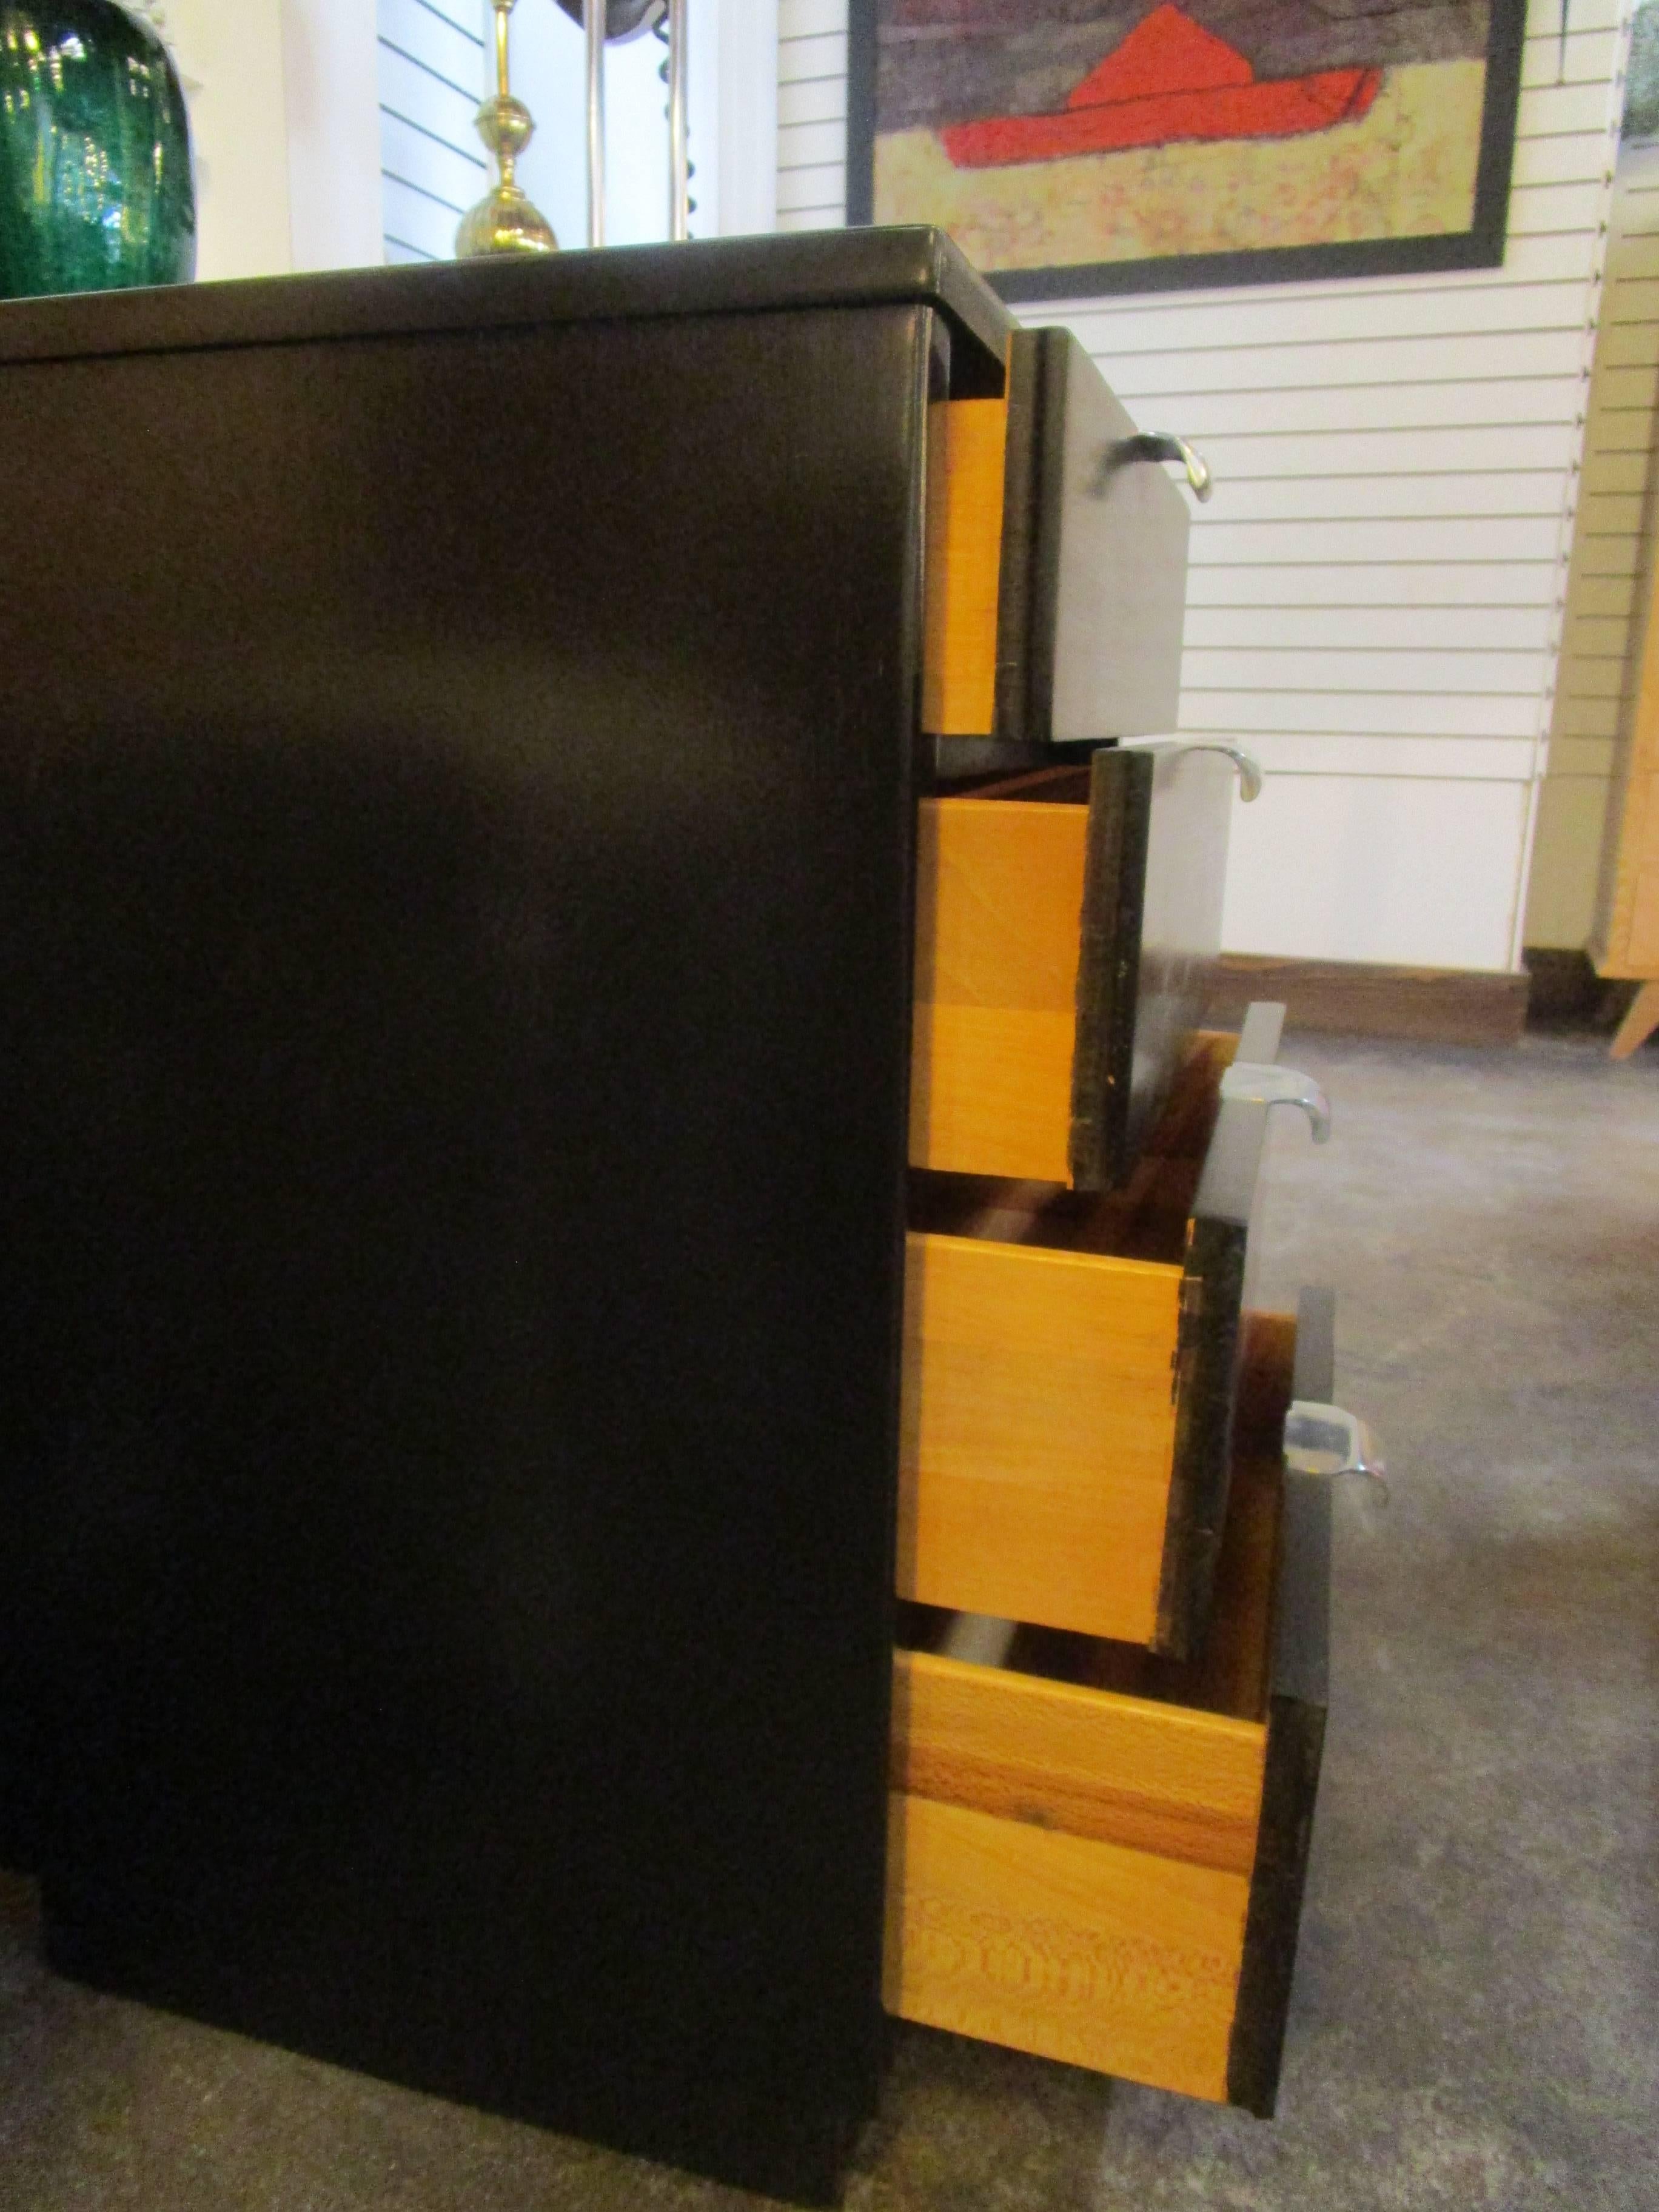 This mid-century nightstand of black stained walnut features steel drawer pulls and drawers in graduating sizes. The largest drawer, at the bottom, measures 7.50 inches high and the smallest on top is 5.0 inches. Marked by Drexel.
It was designed by